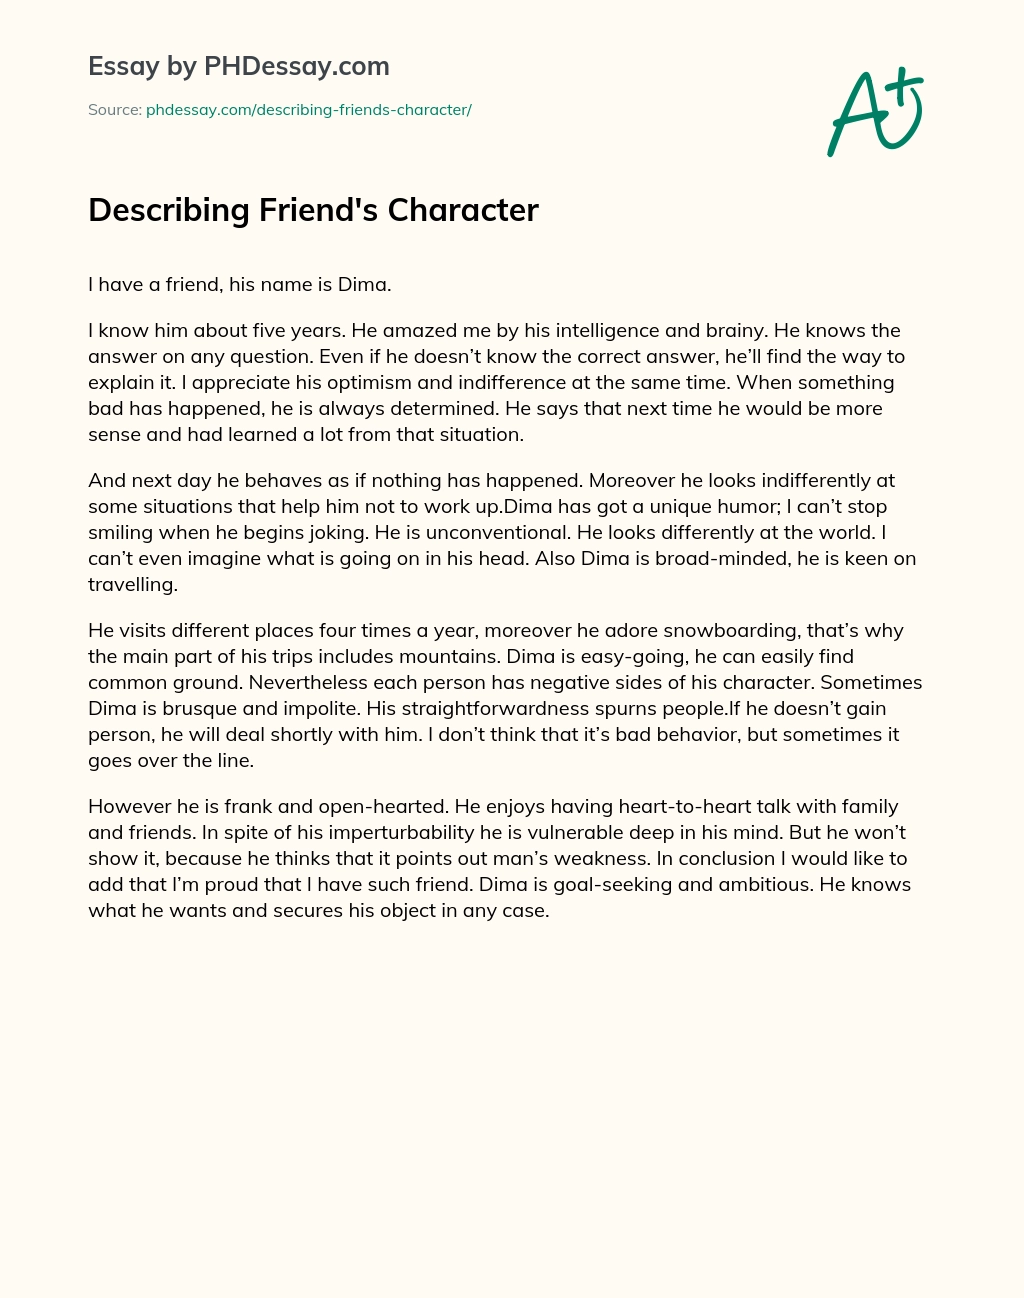 Describing Friend’s Character And Character Formation in Schools essay